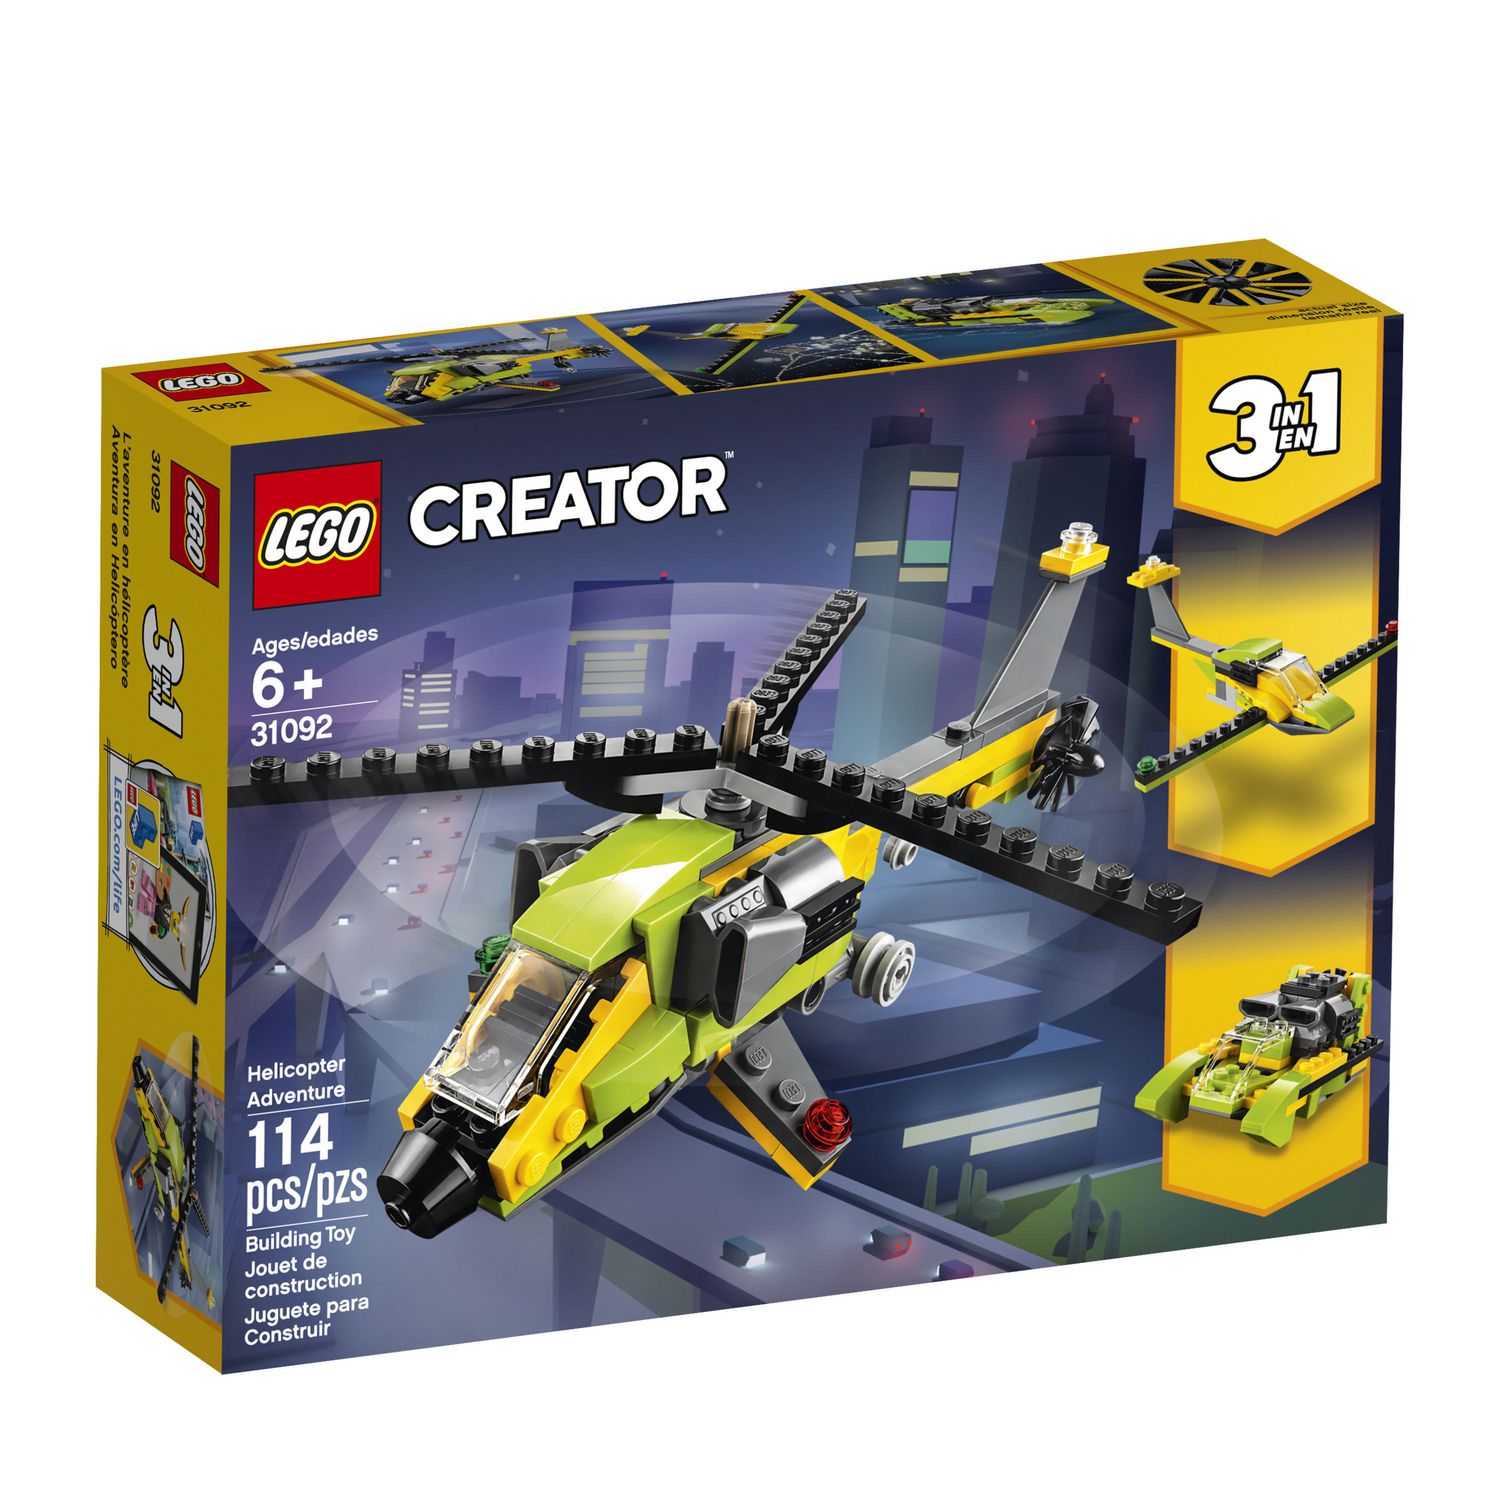 LEGO Creator 3in1 Helicopter Adventure 31092 Building Kit (114 Piece)